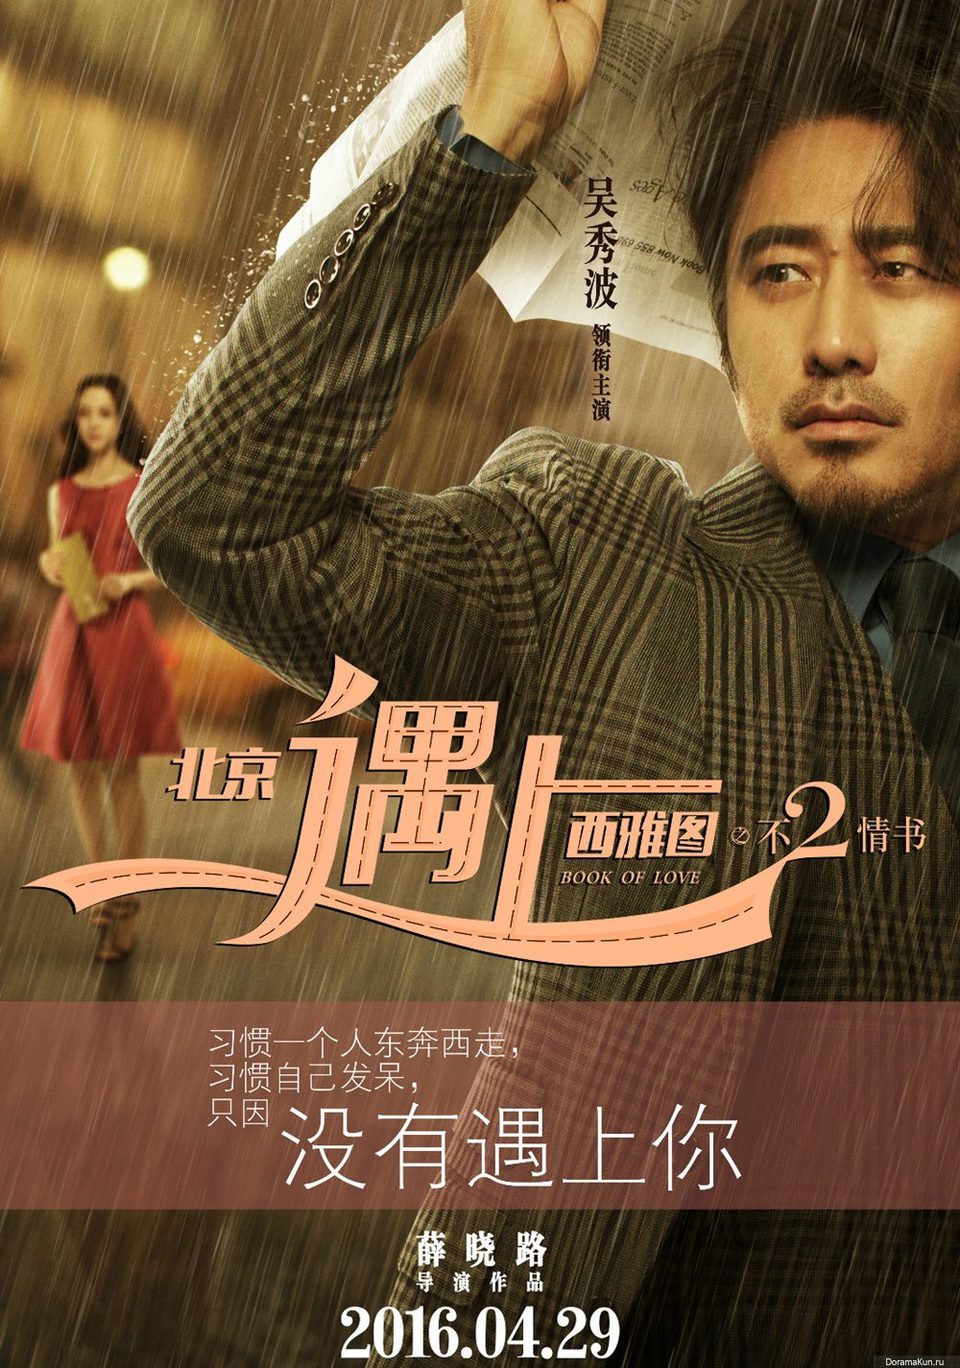 Poster of Finding Mr. Right 2 - China #2